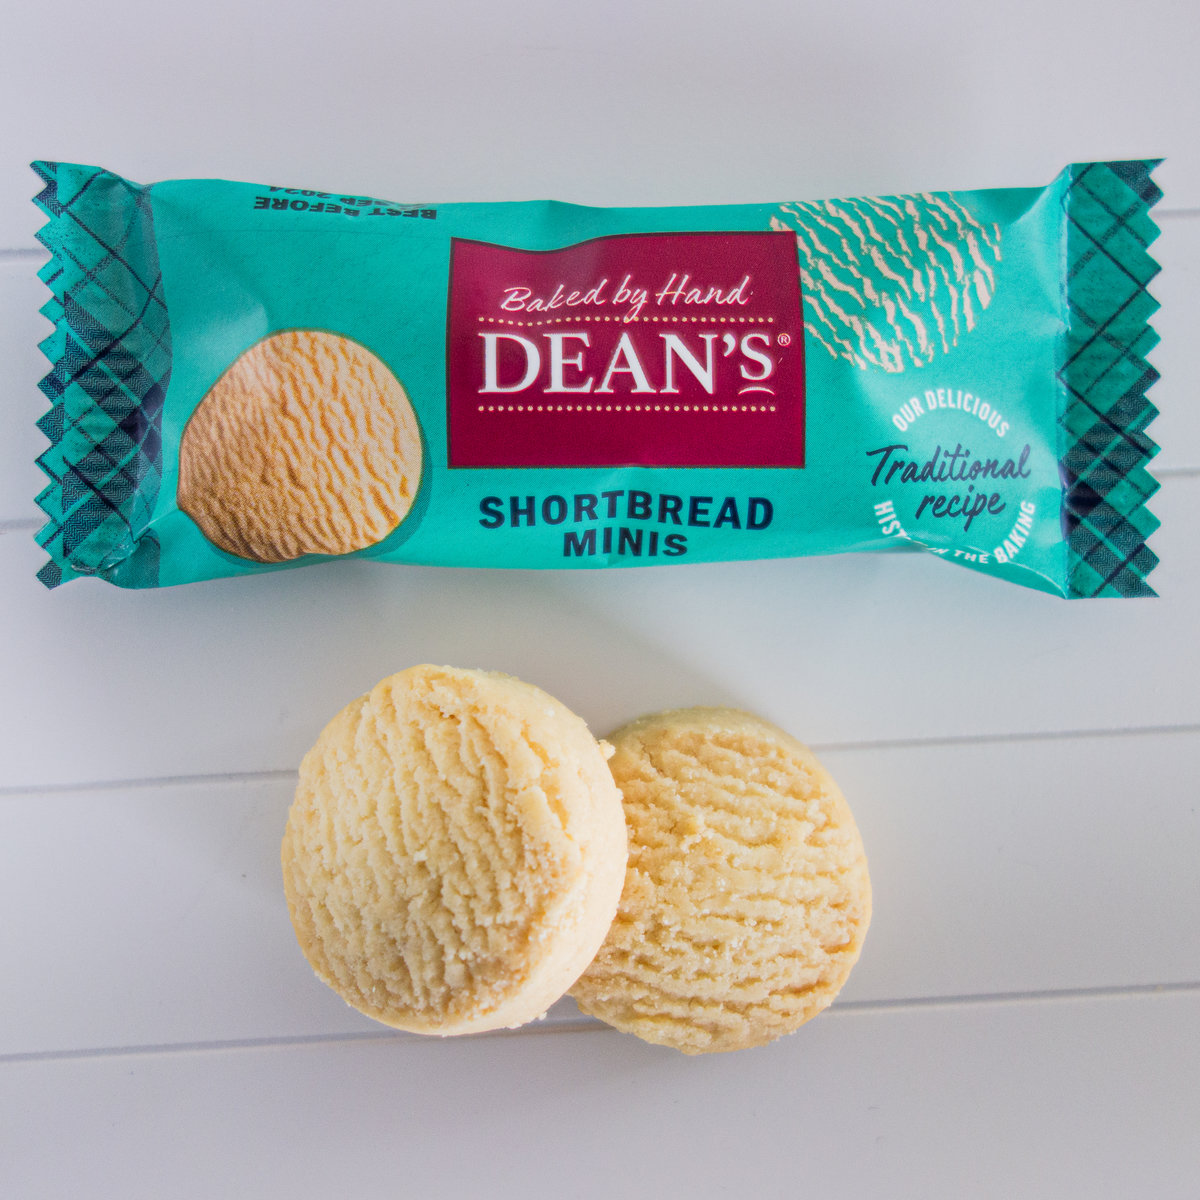 Buy the Shortbread Minis 20g x 80 online at Dean's of Huntly Ltd